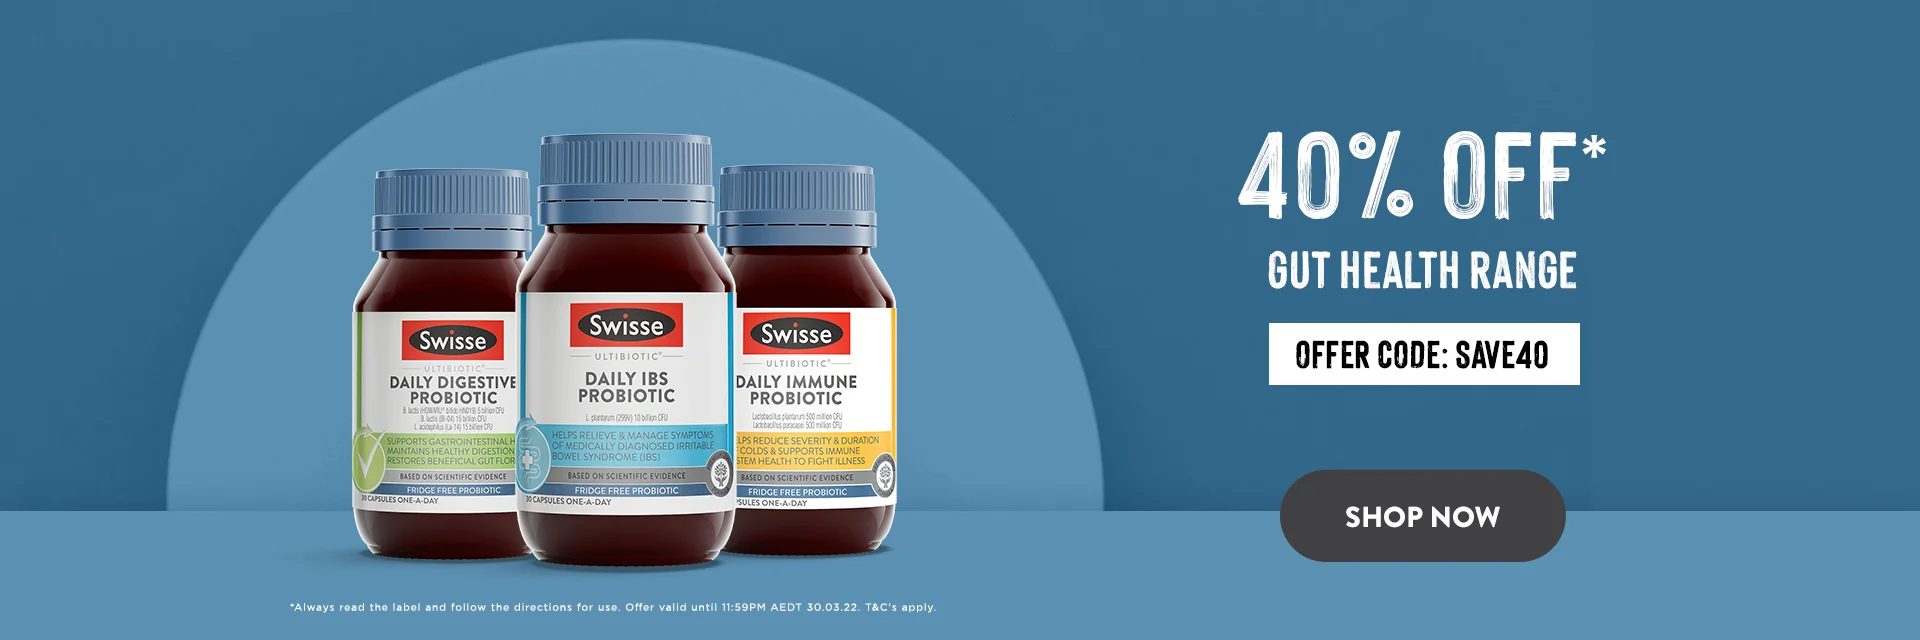 Swisse extra 40% OFF on GUT Health range with promo code